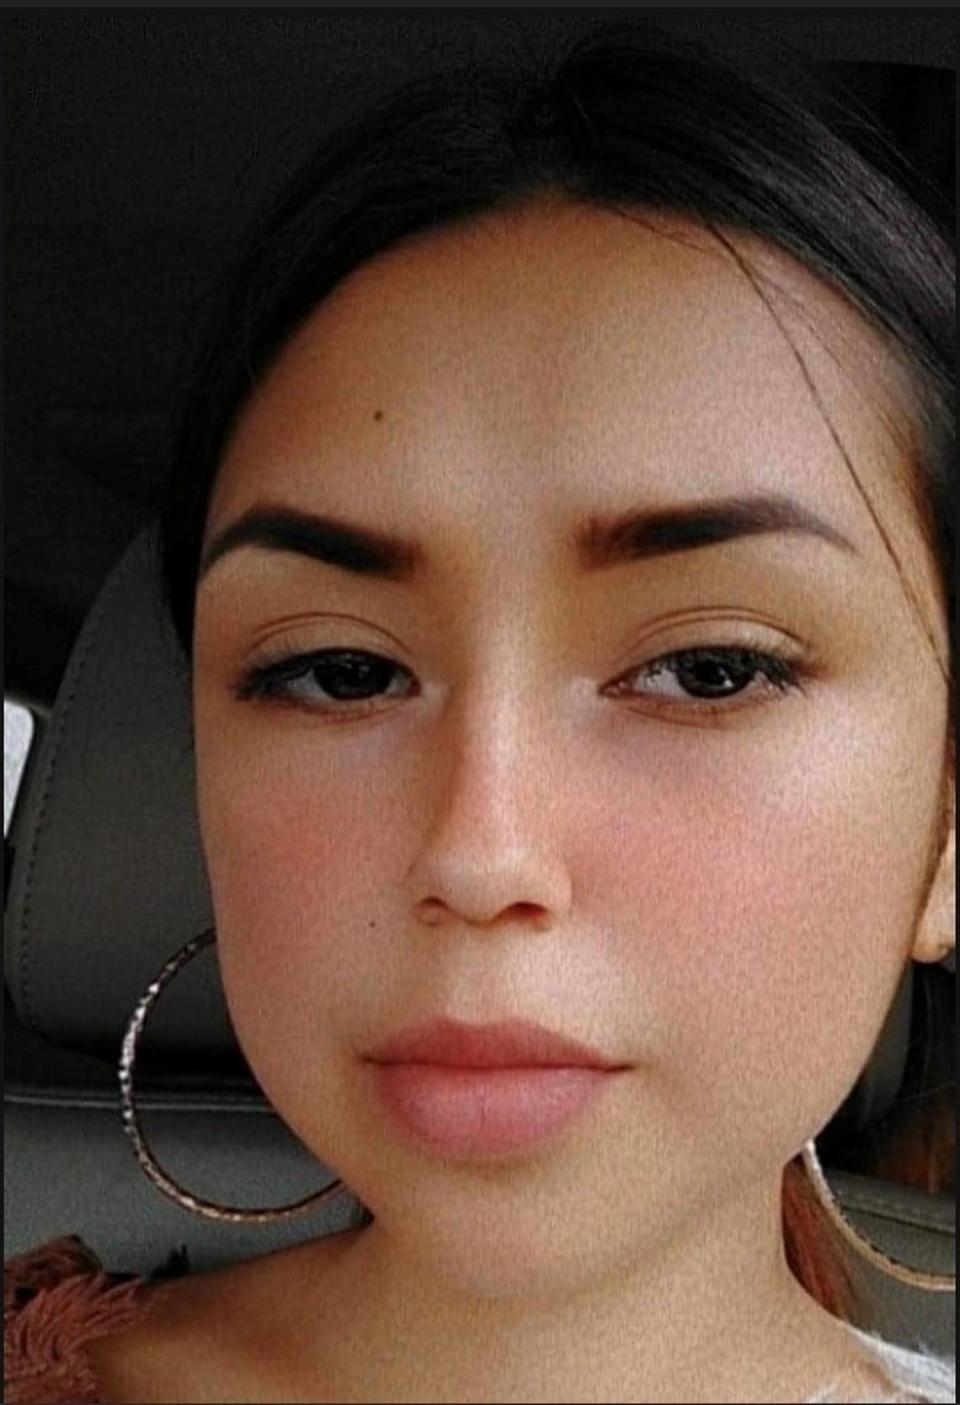 Alilianna Trujillo, 15, was reported missing while visiting family members in Nipomo, the San Luis Obispo County Sheriff’s Office said.